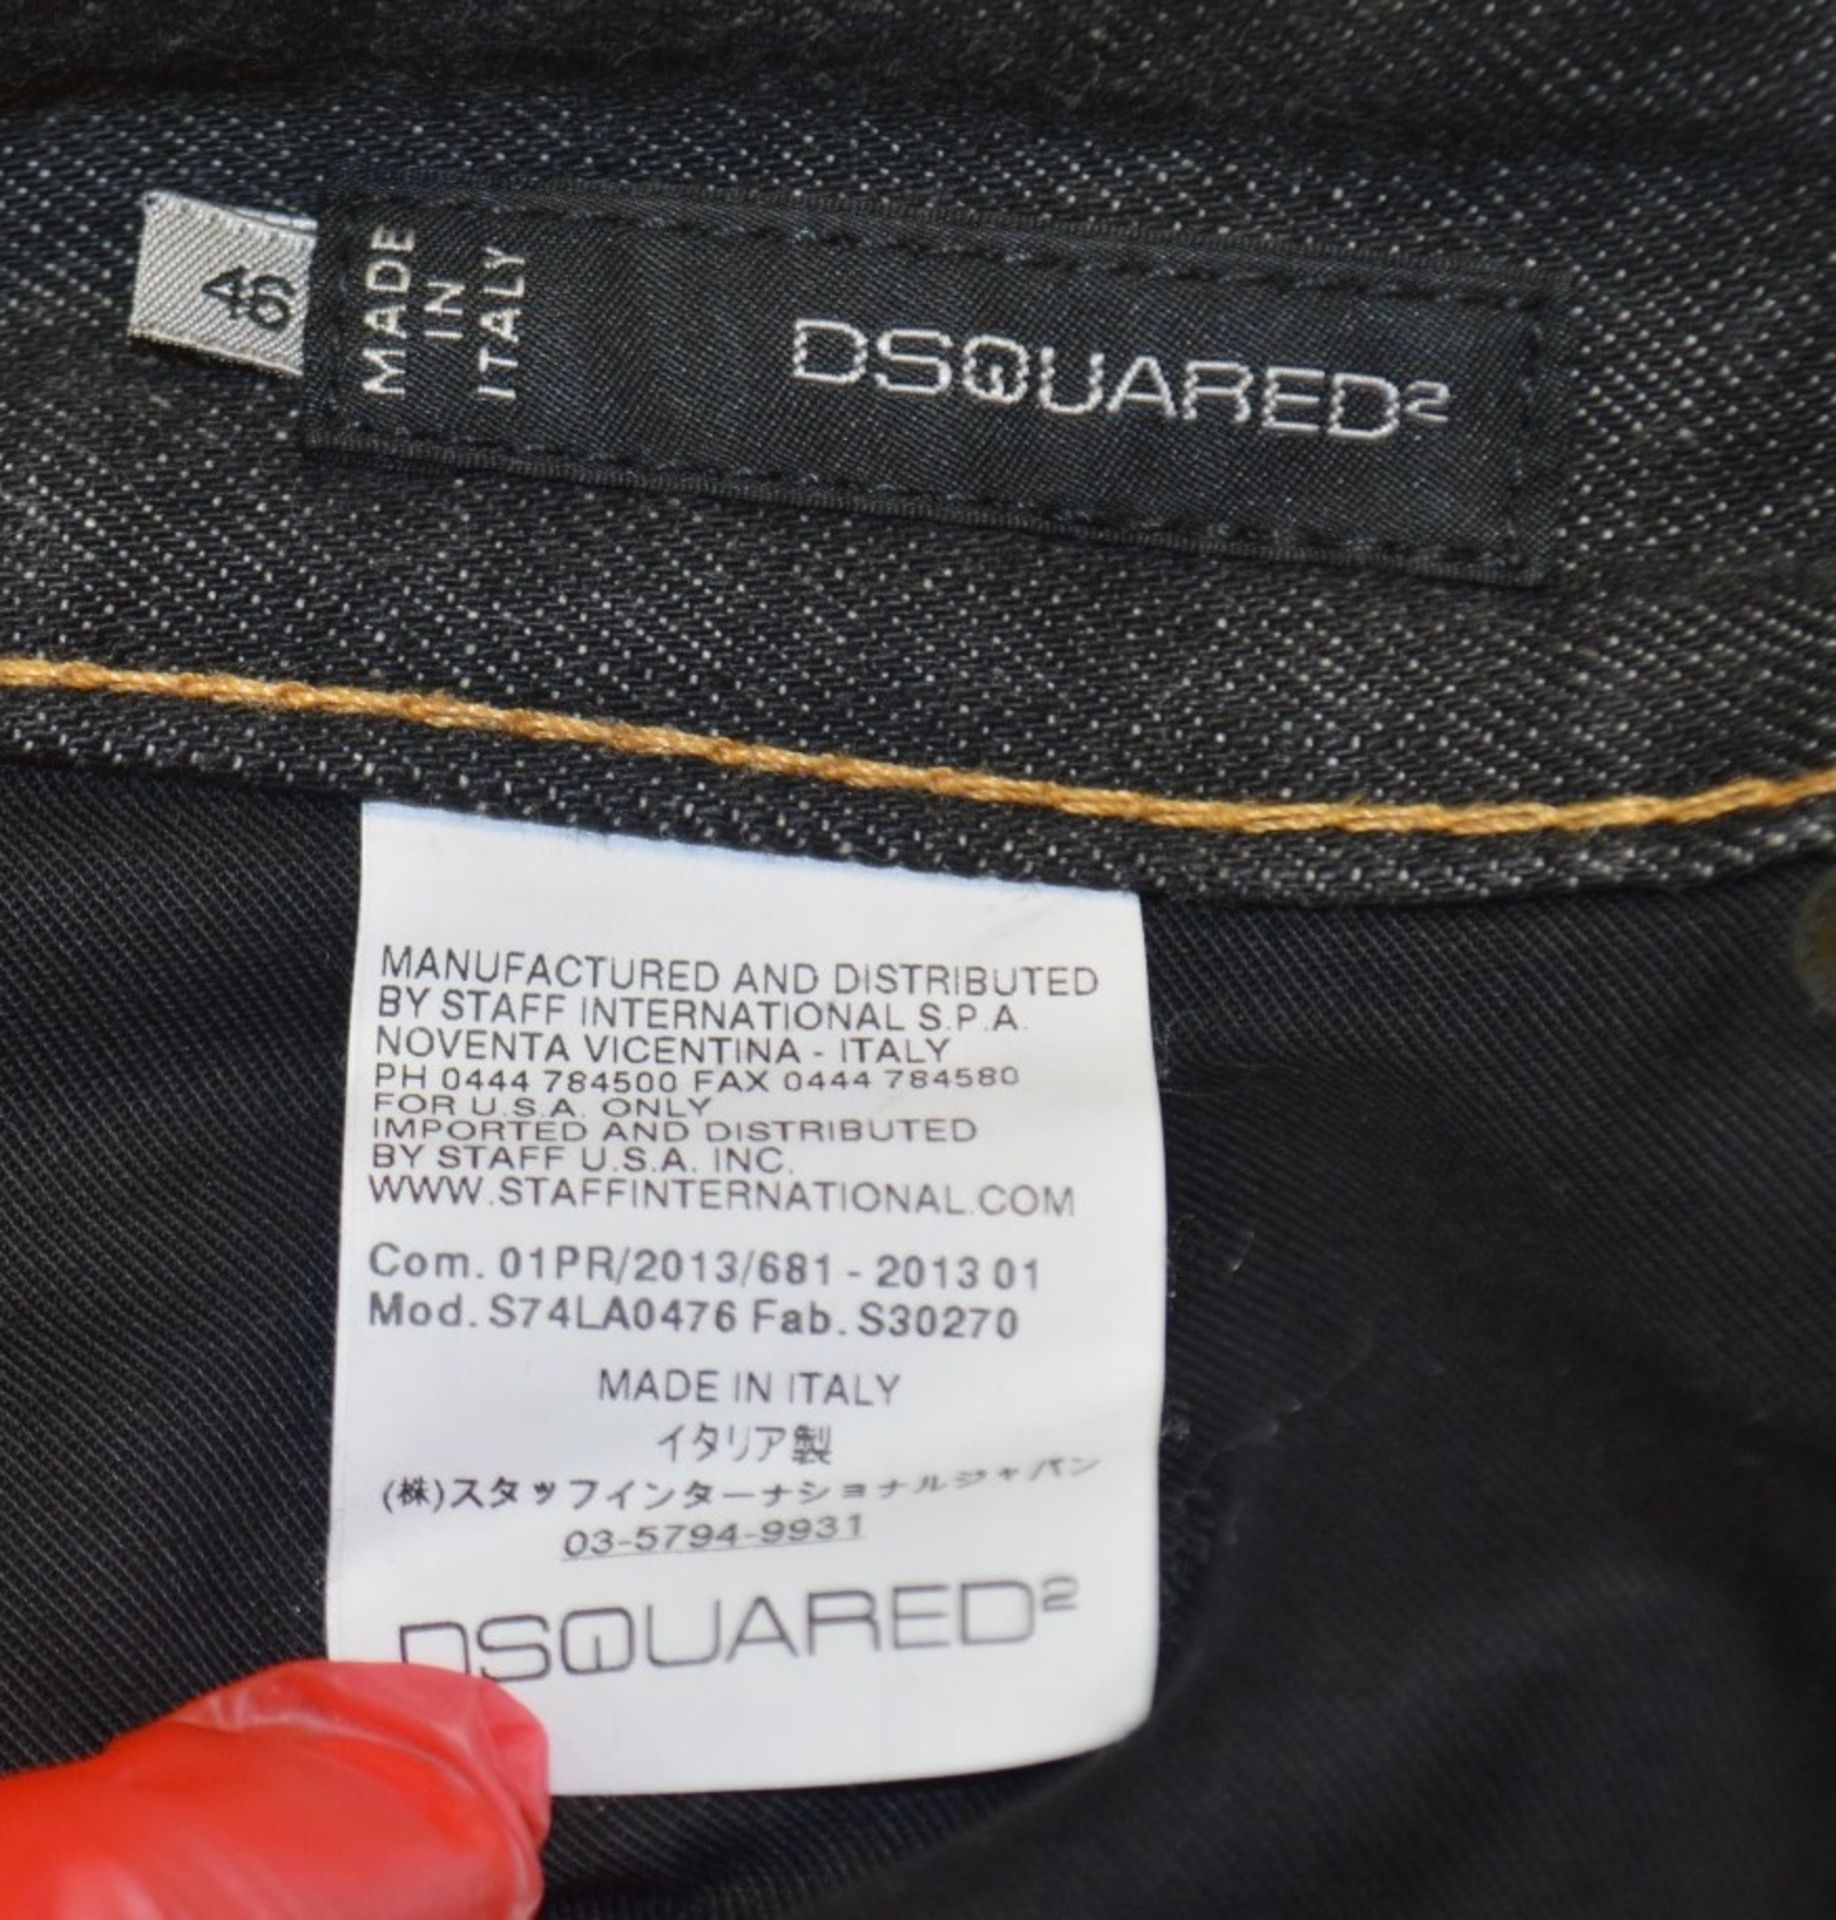 1 x Pair Of Men's Genuine Dsquared2 Distressed-style Designer Jeans In Black - Size: UK 30 - Image 4 of 7